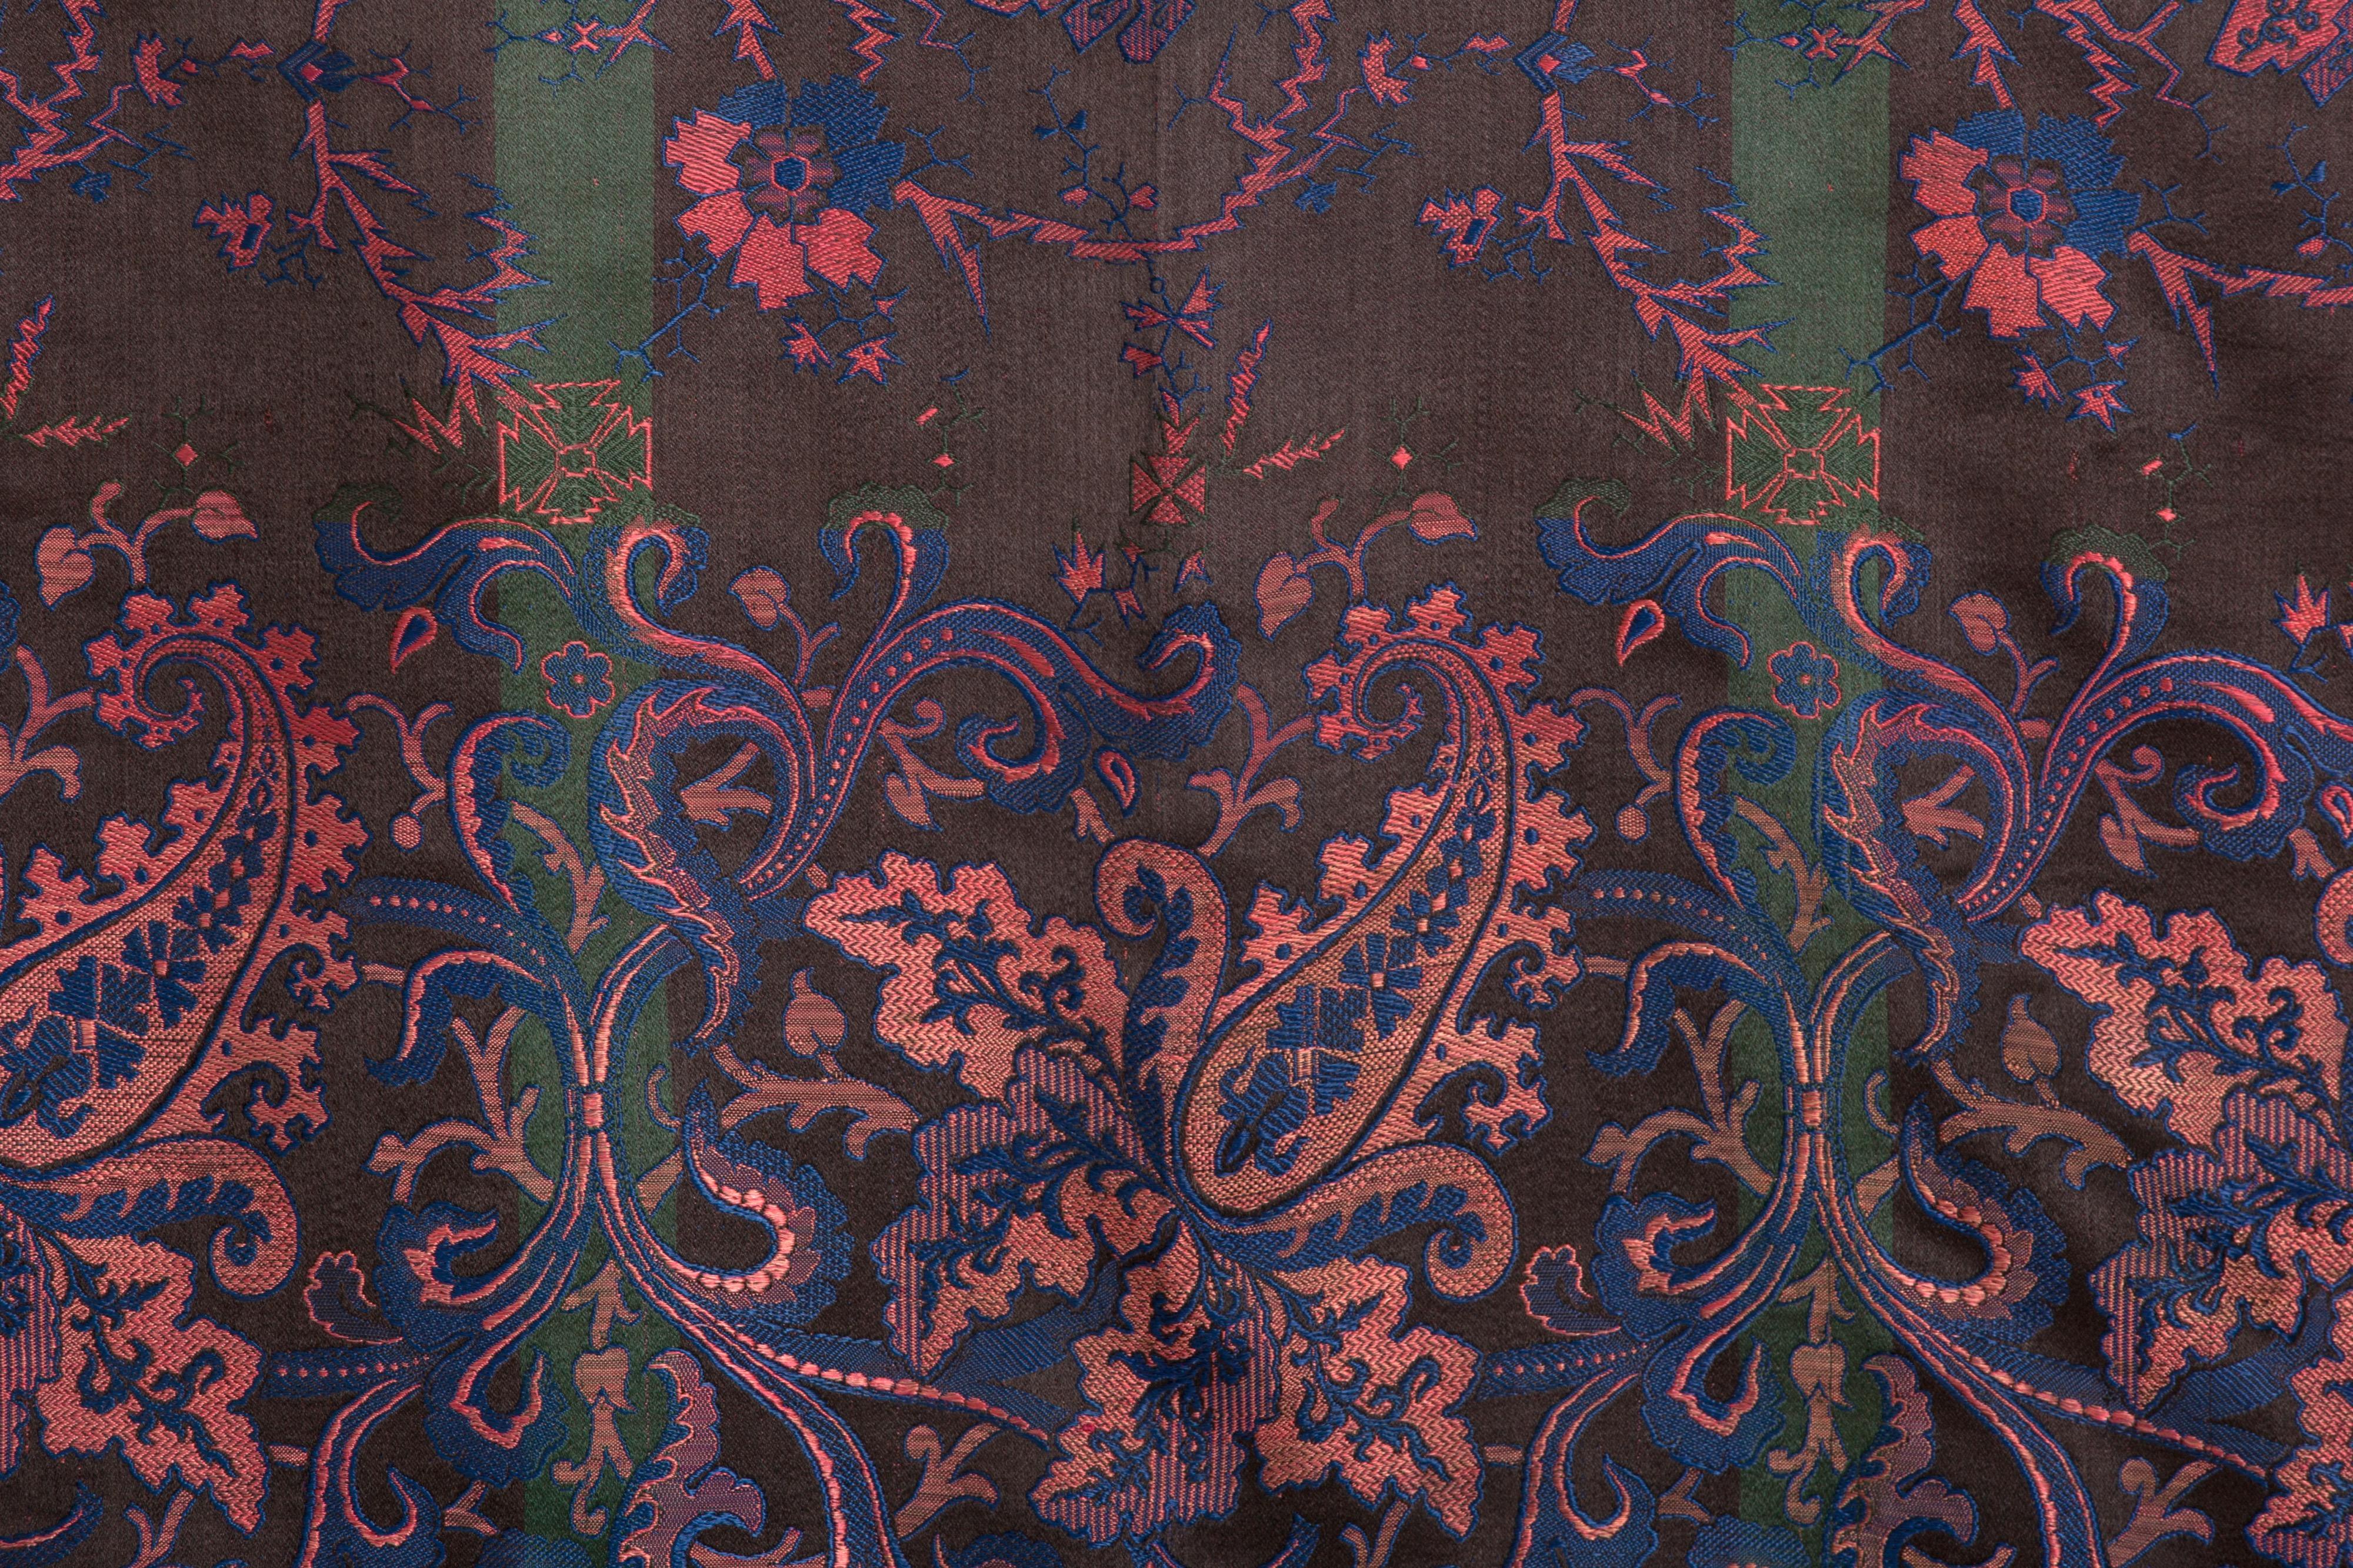 Stylized floral and boteh motifs. This jacquard woven silk shawl is a prime example of expert silk textile manufacturing in Lyon during the 19th century. Bright pink, green, blue wefts create complex weave structures across a black warp. Applied